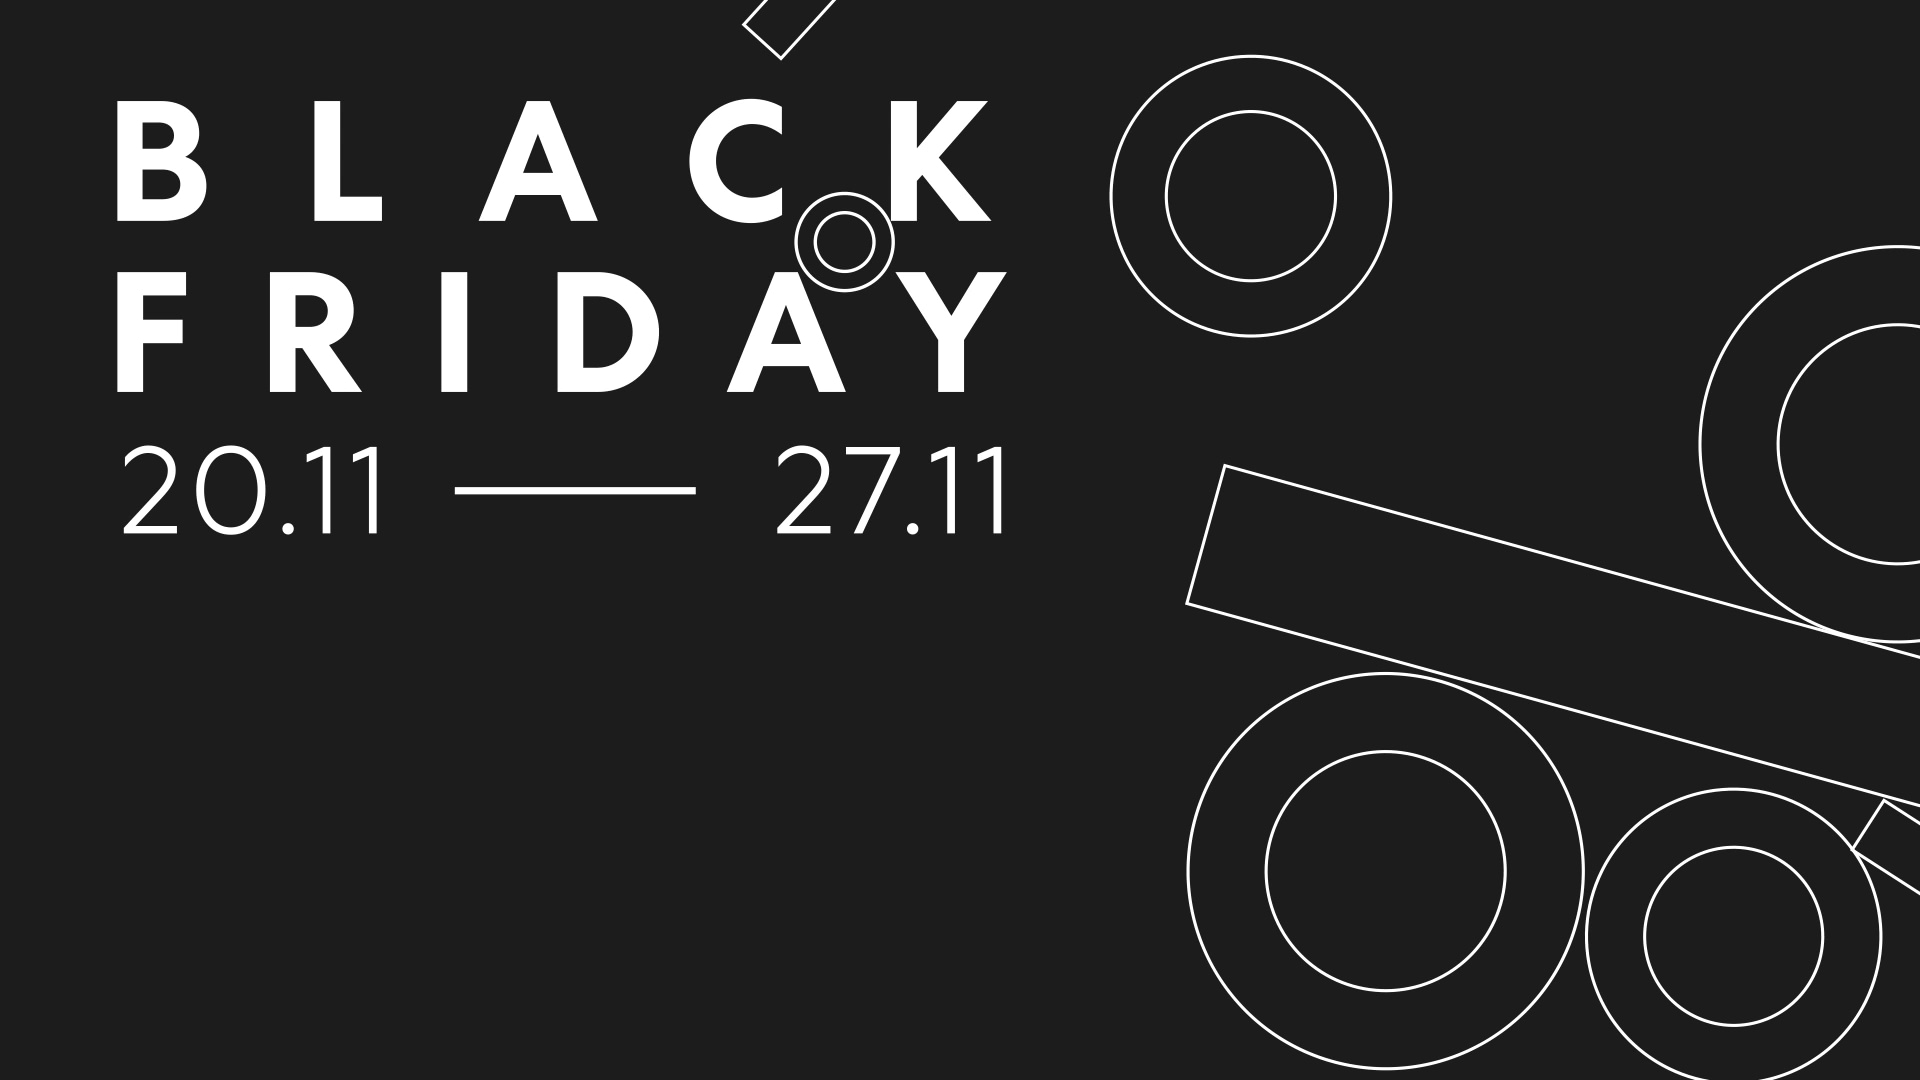 Image taken from the Zippy motion film, a black and white visual composition symbolizing the Black Friday day.